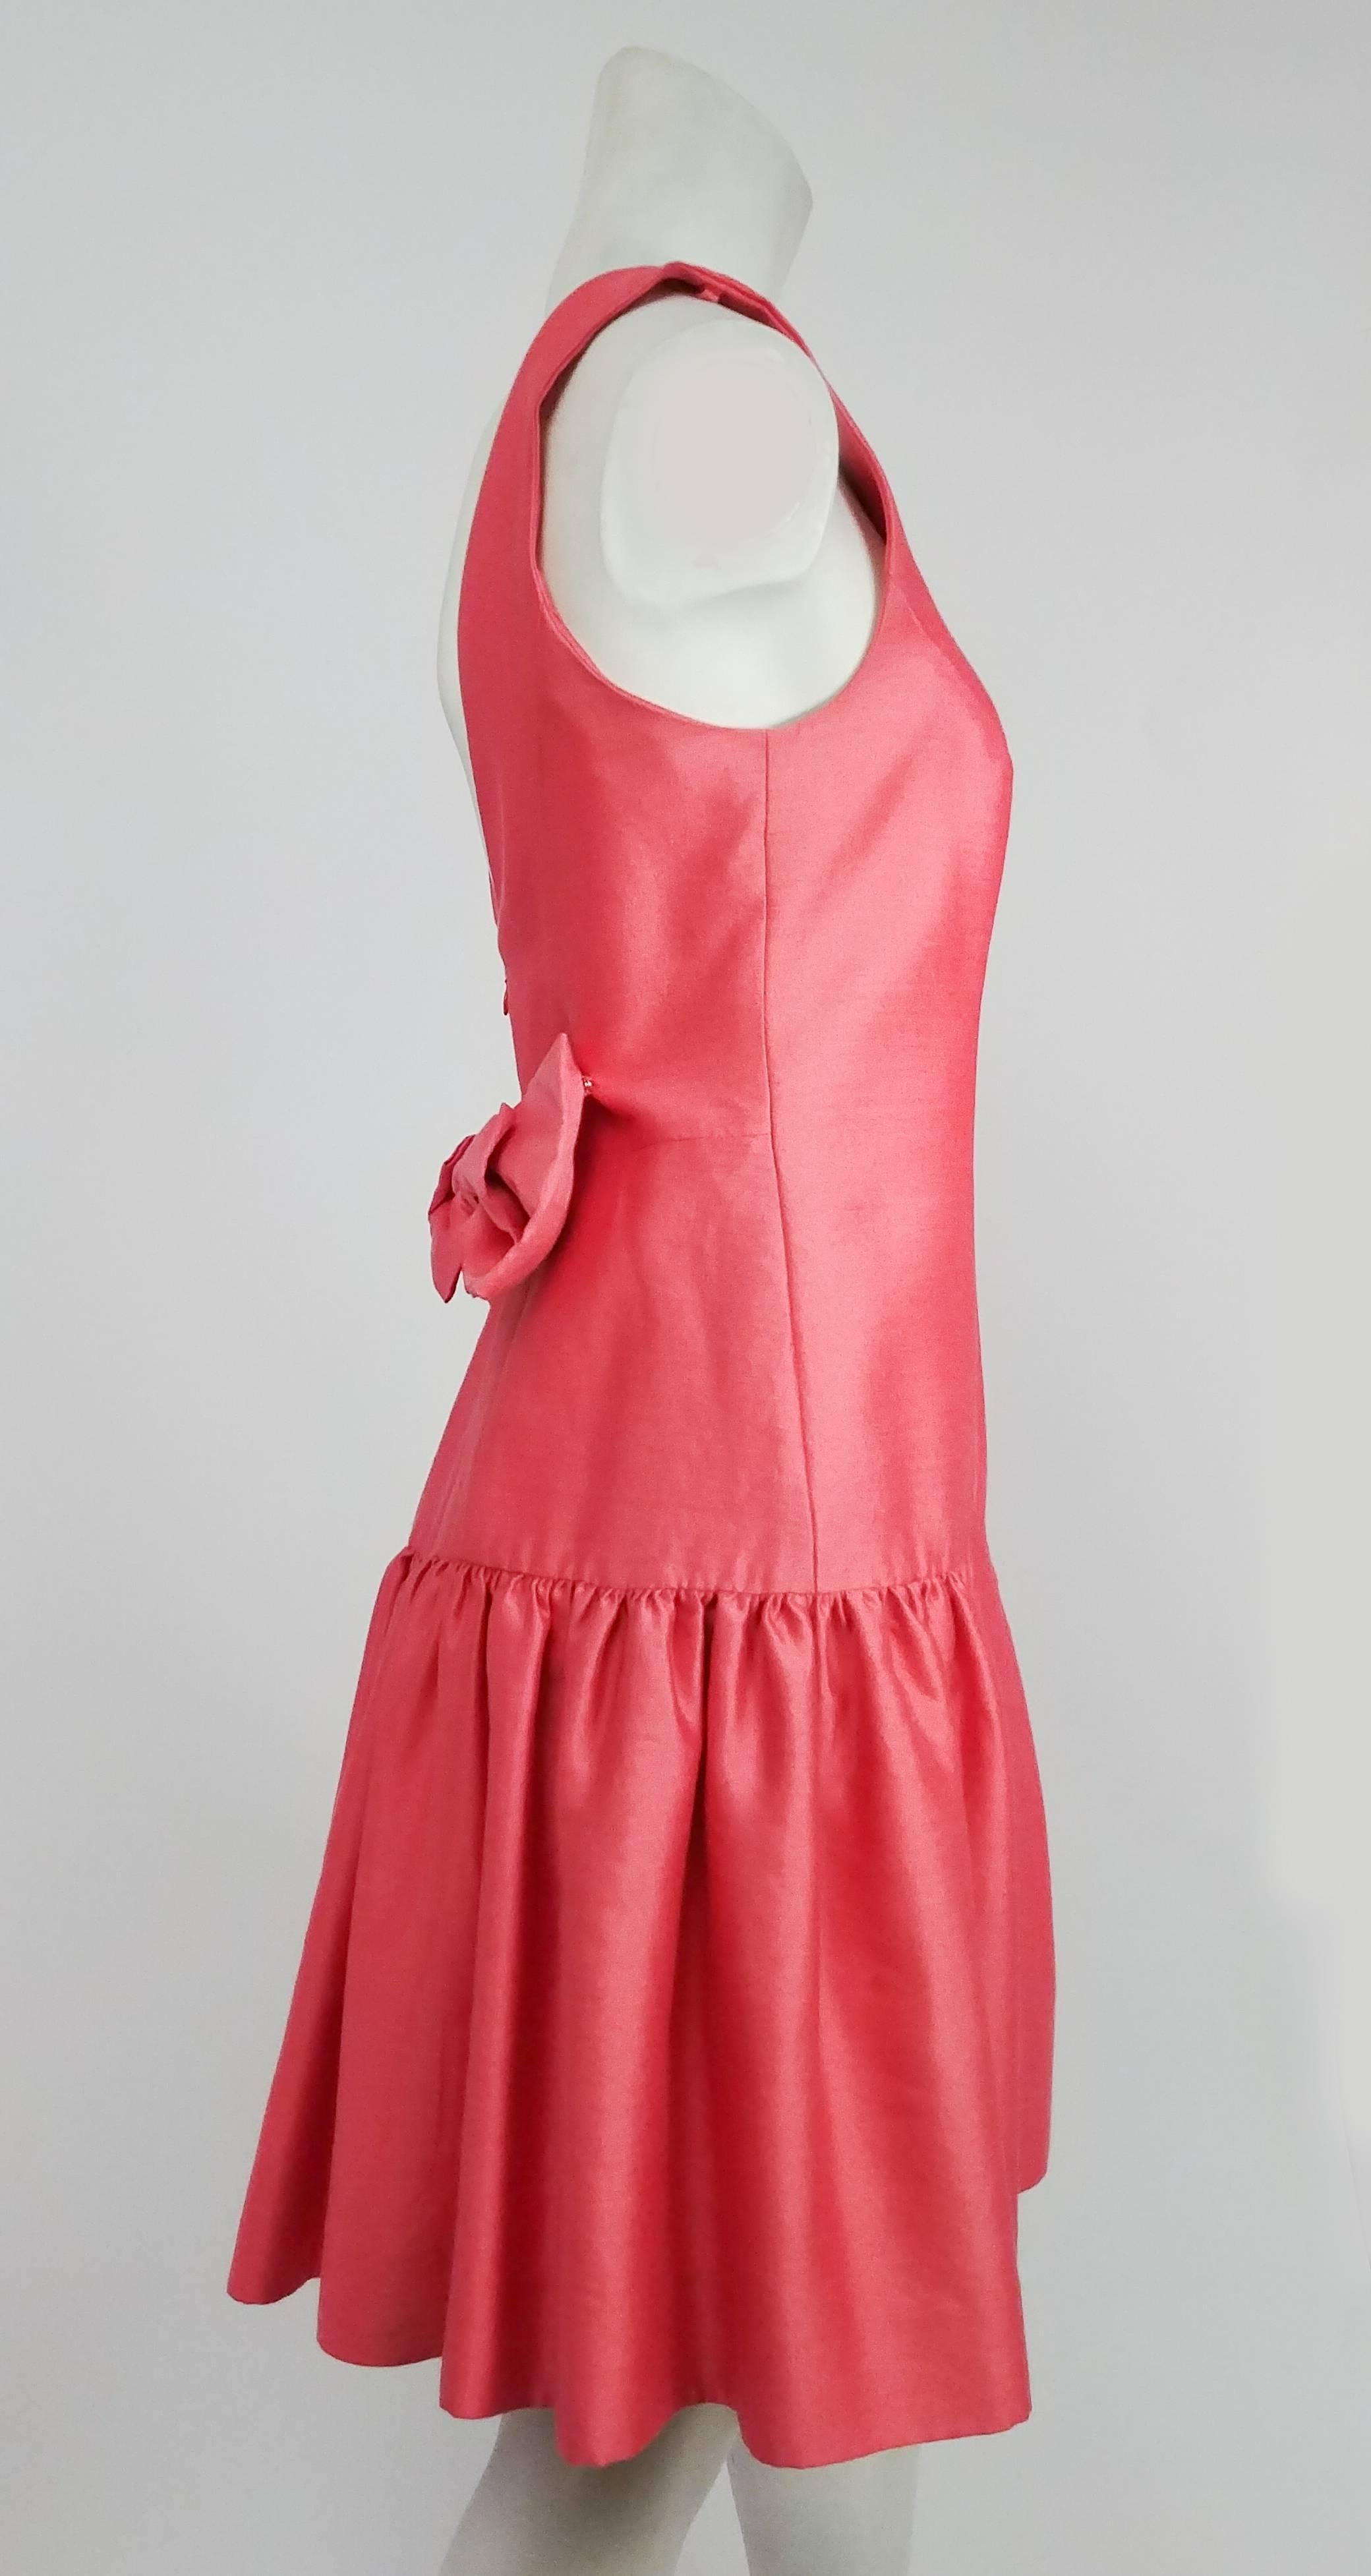 1990s Pink Low Waisted Ruffled Dress. Zips up back to low v point, bow detail at center back snaps onto one side. 